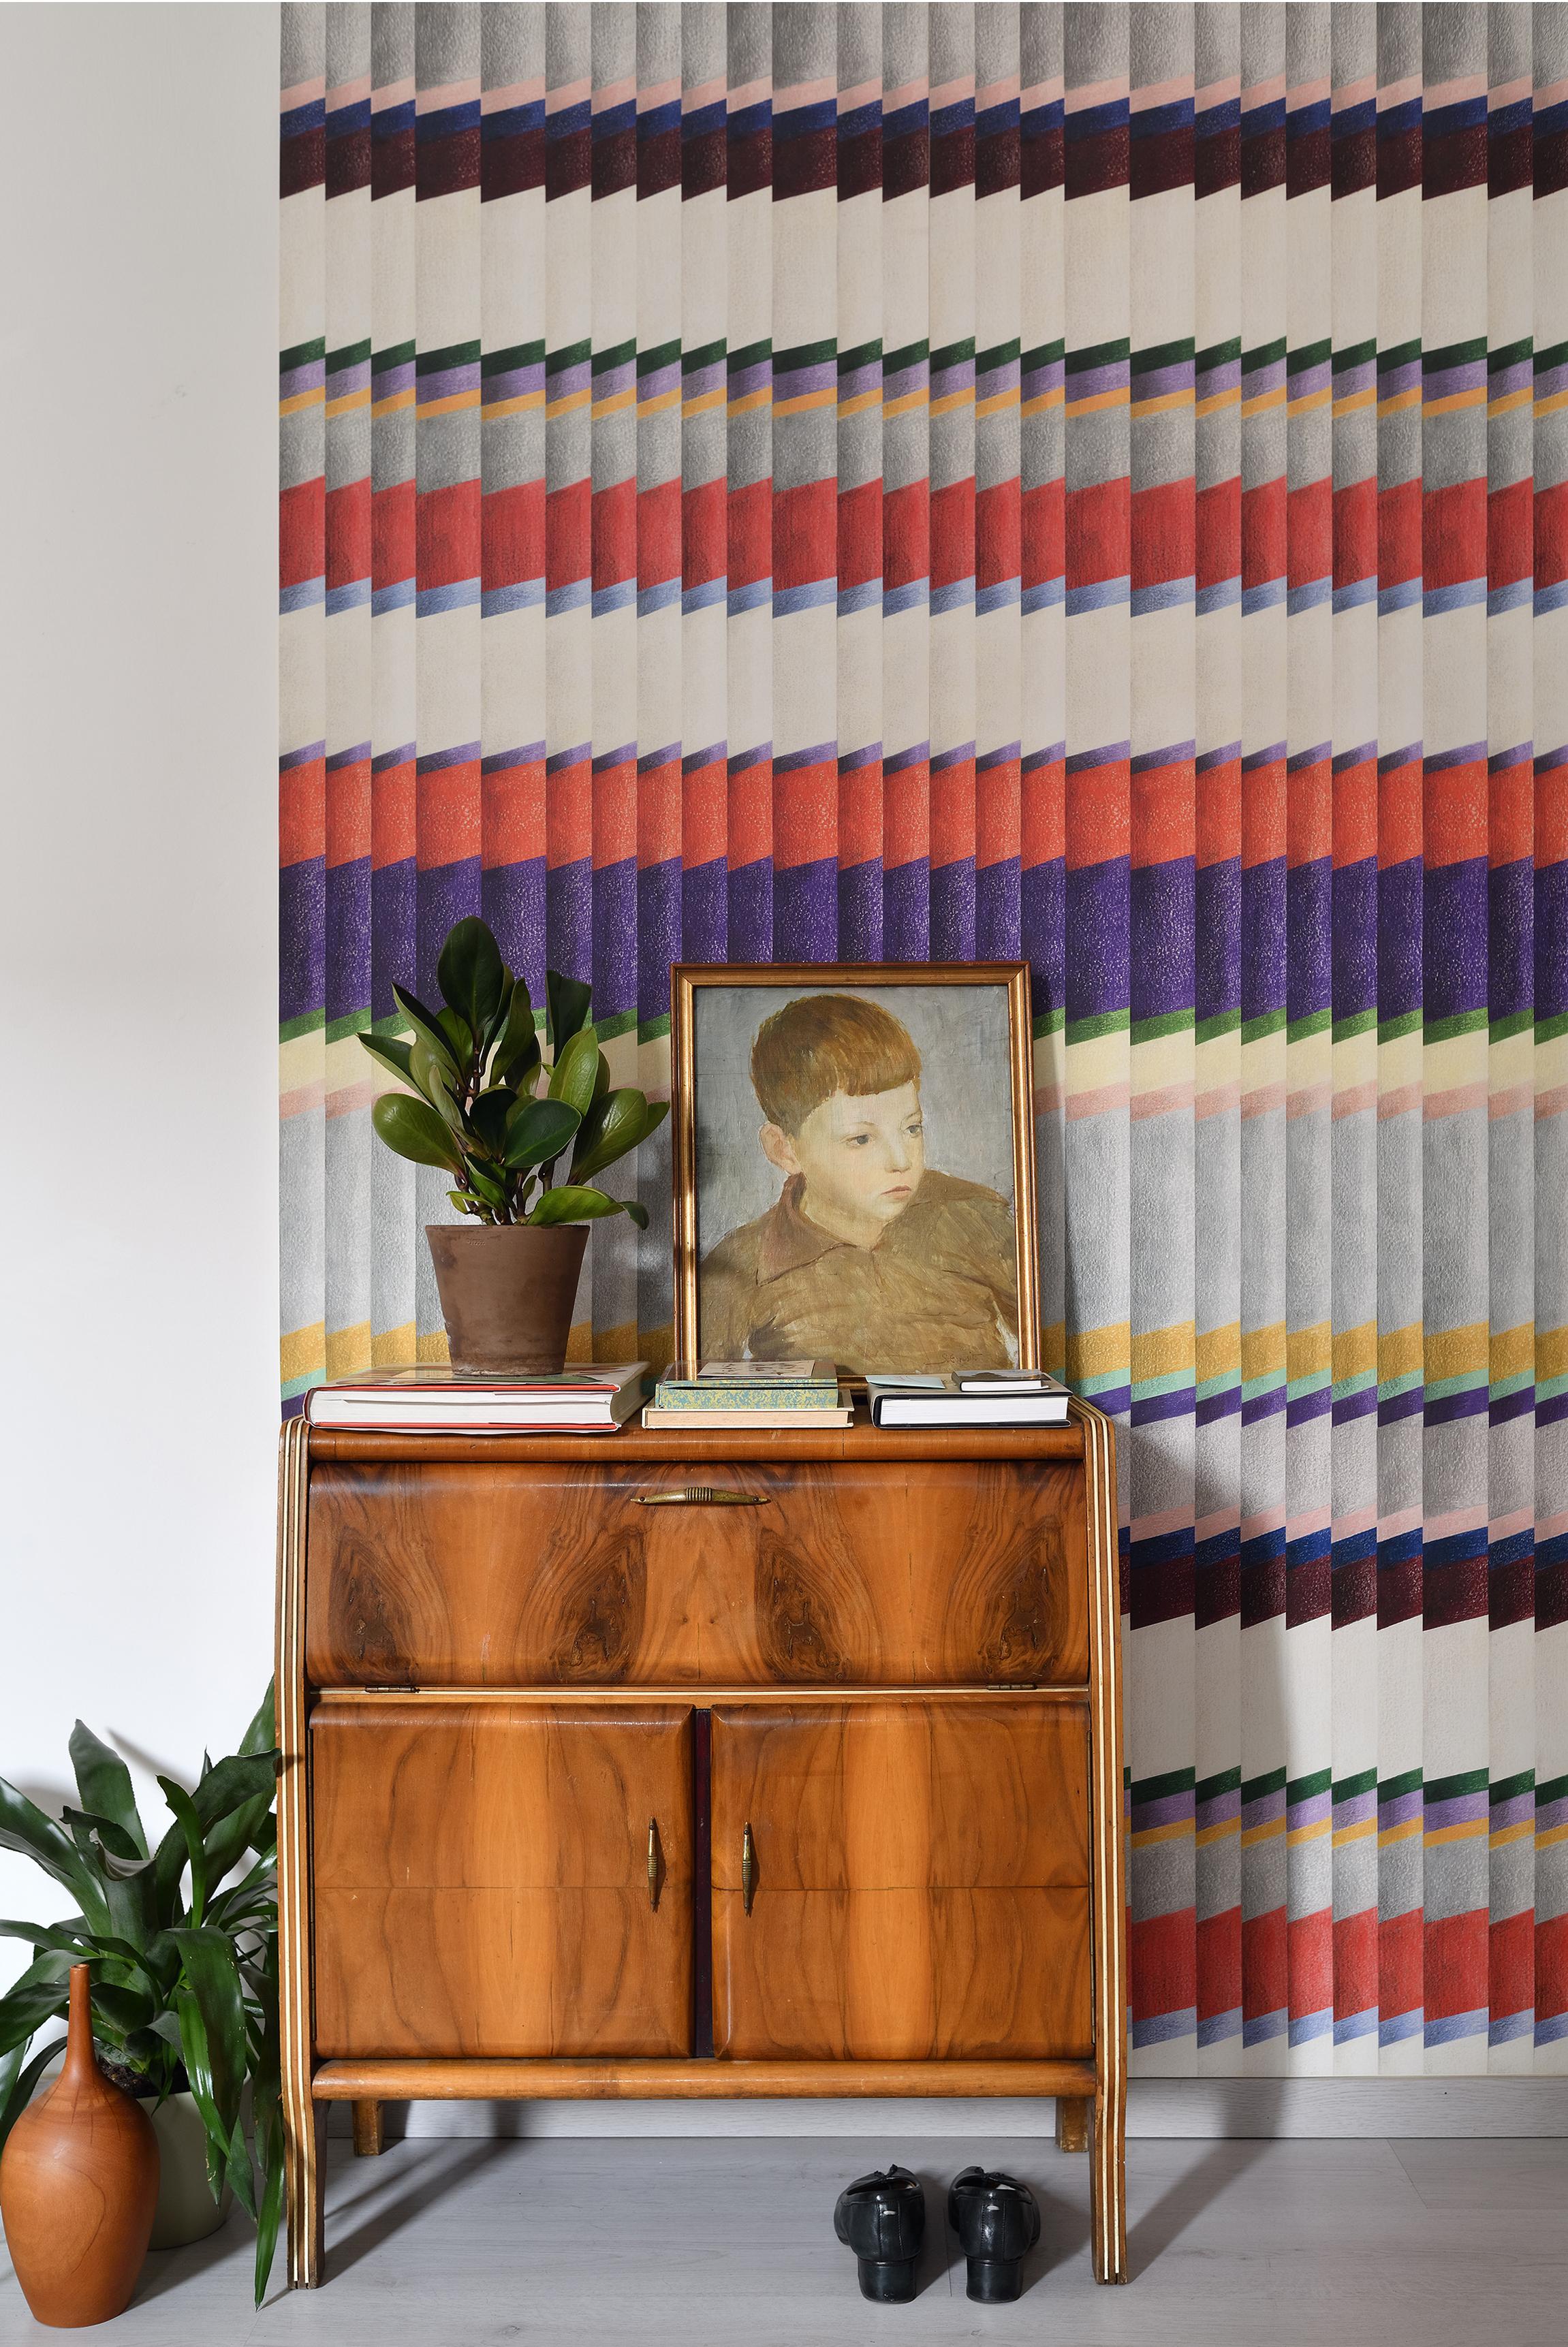 With its beautiful peach touch tnt base, Pleats! wallcovering features an original and unique coloring technique that brings out the surface texture in rich shades creating a chiaroscuro effect that appears to move the wall with a sophisticated